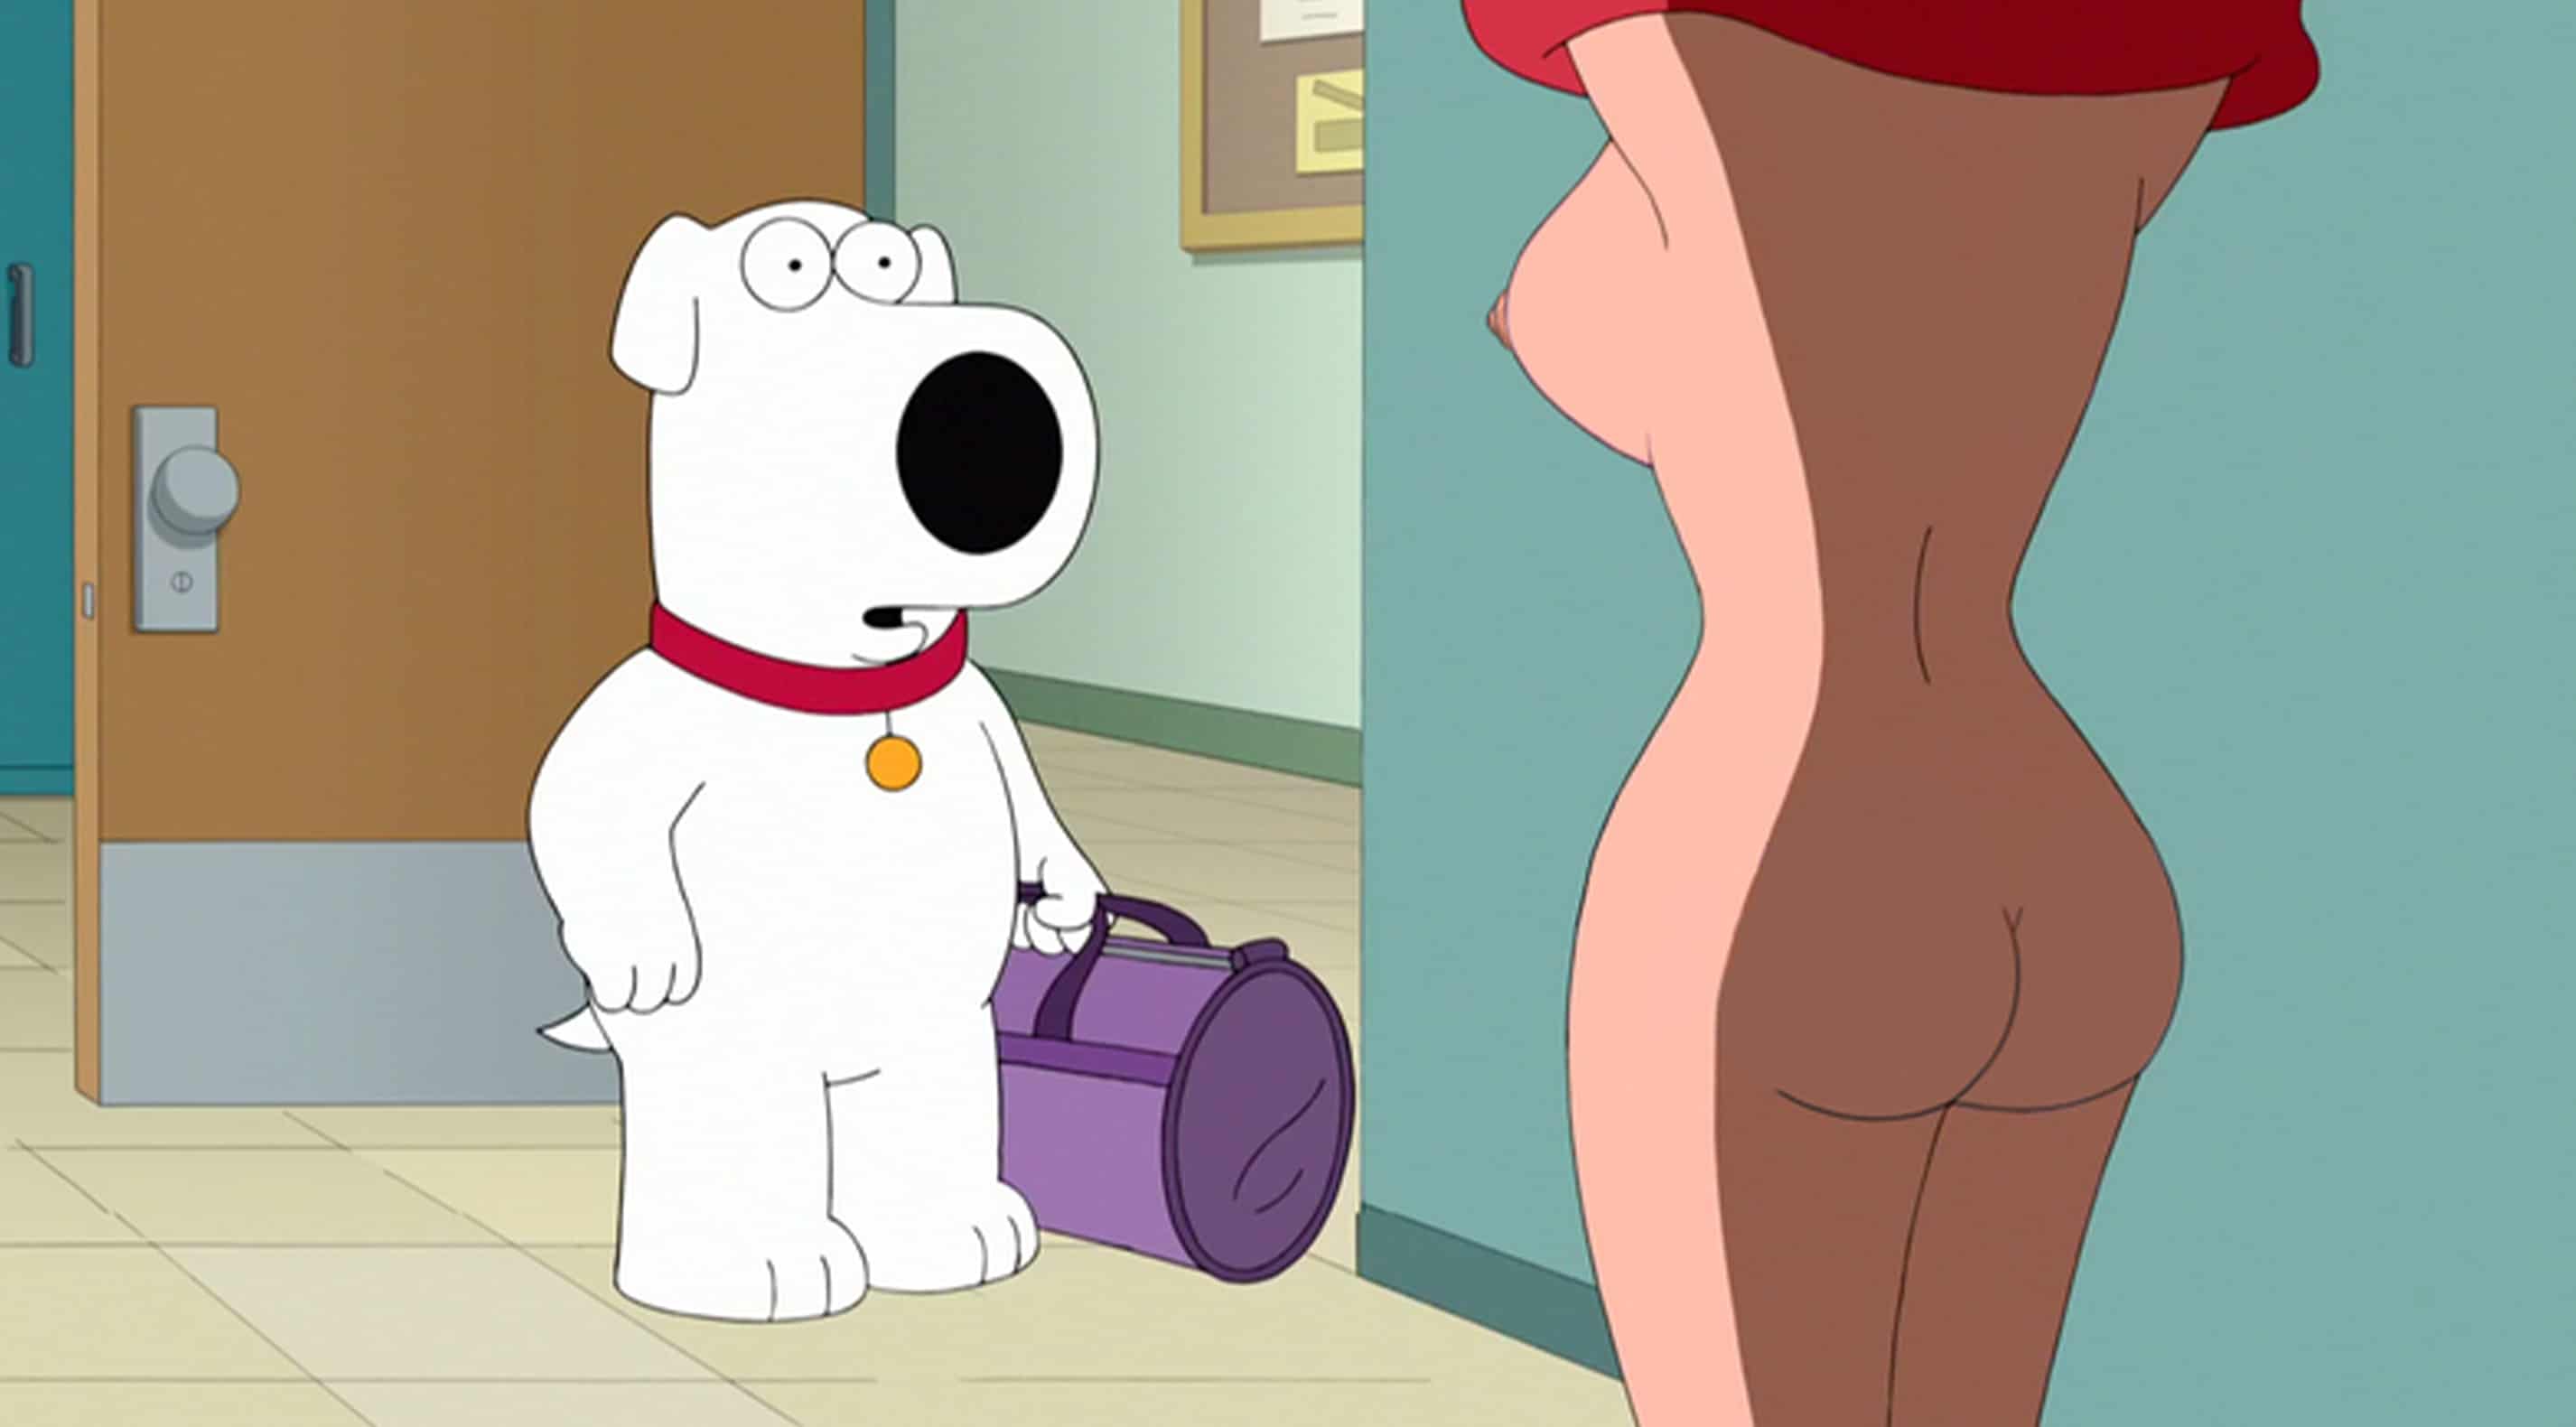 christy dennison recommends lois griffin porn game pic